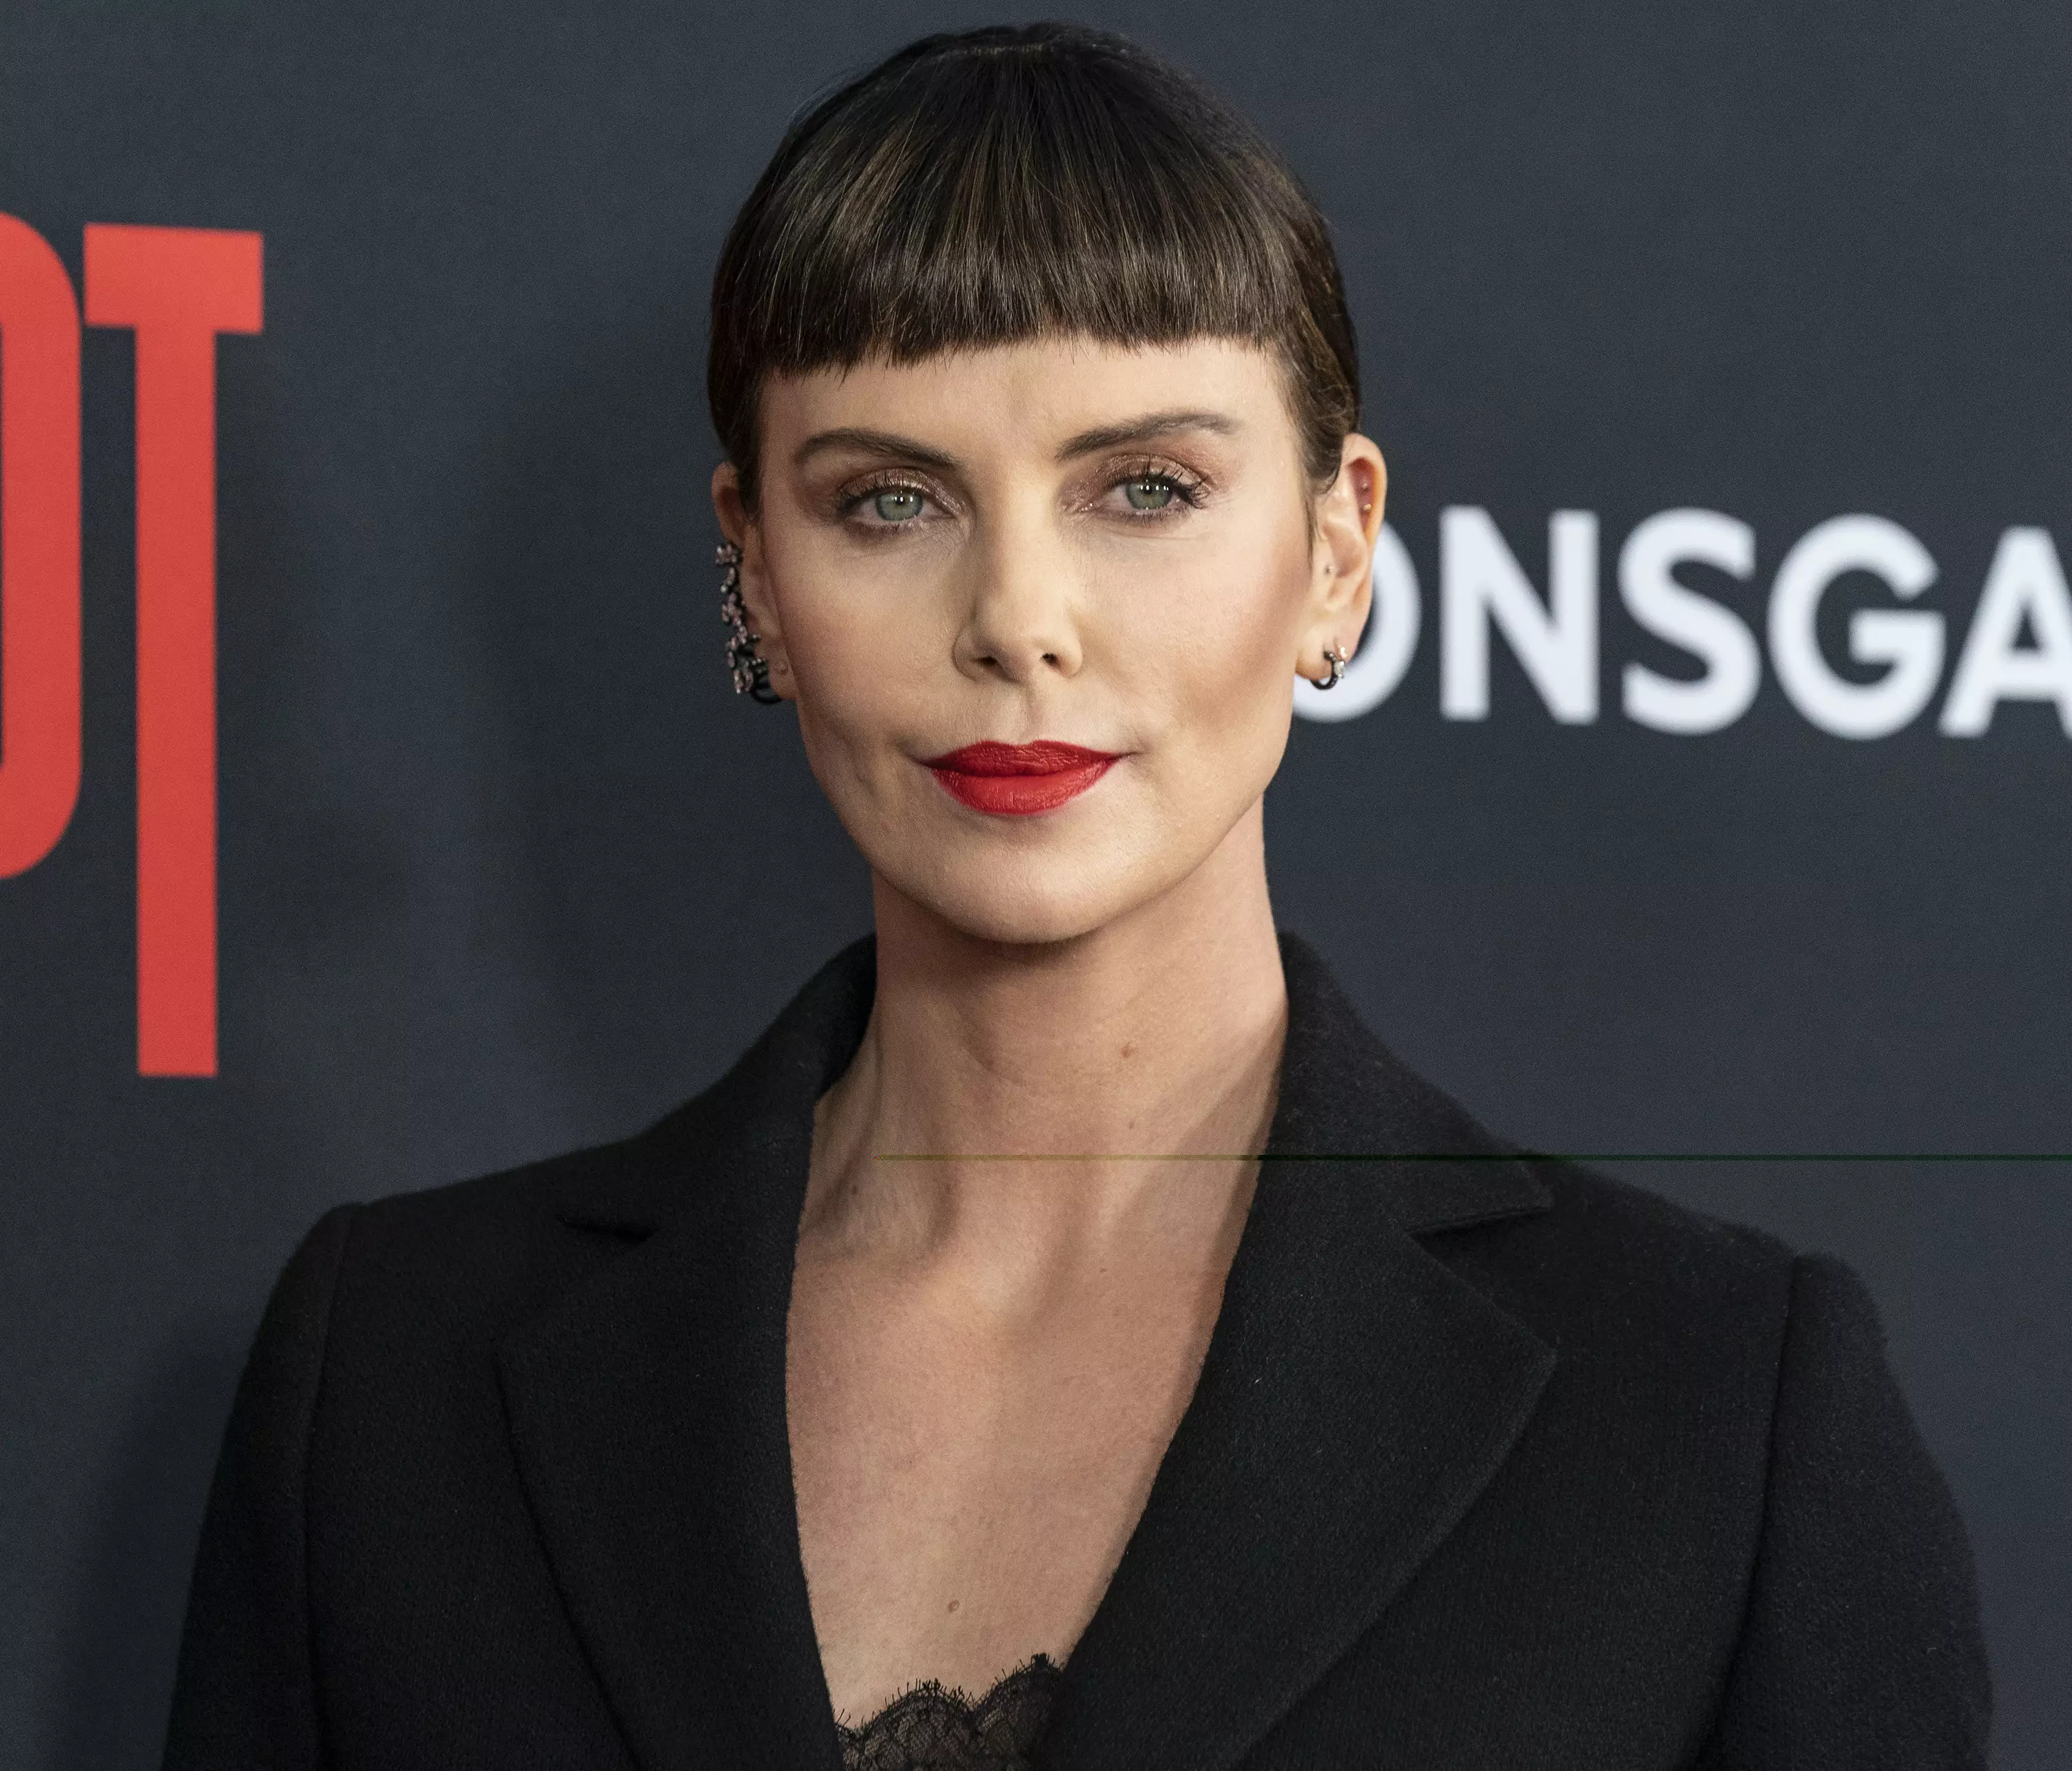 Charlize Theron is producing the show.